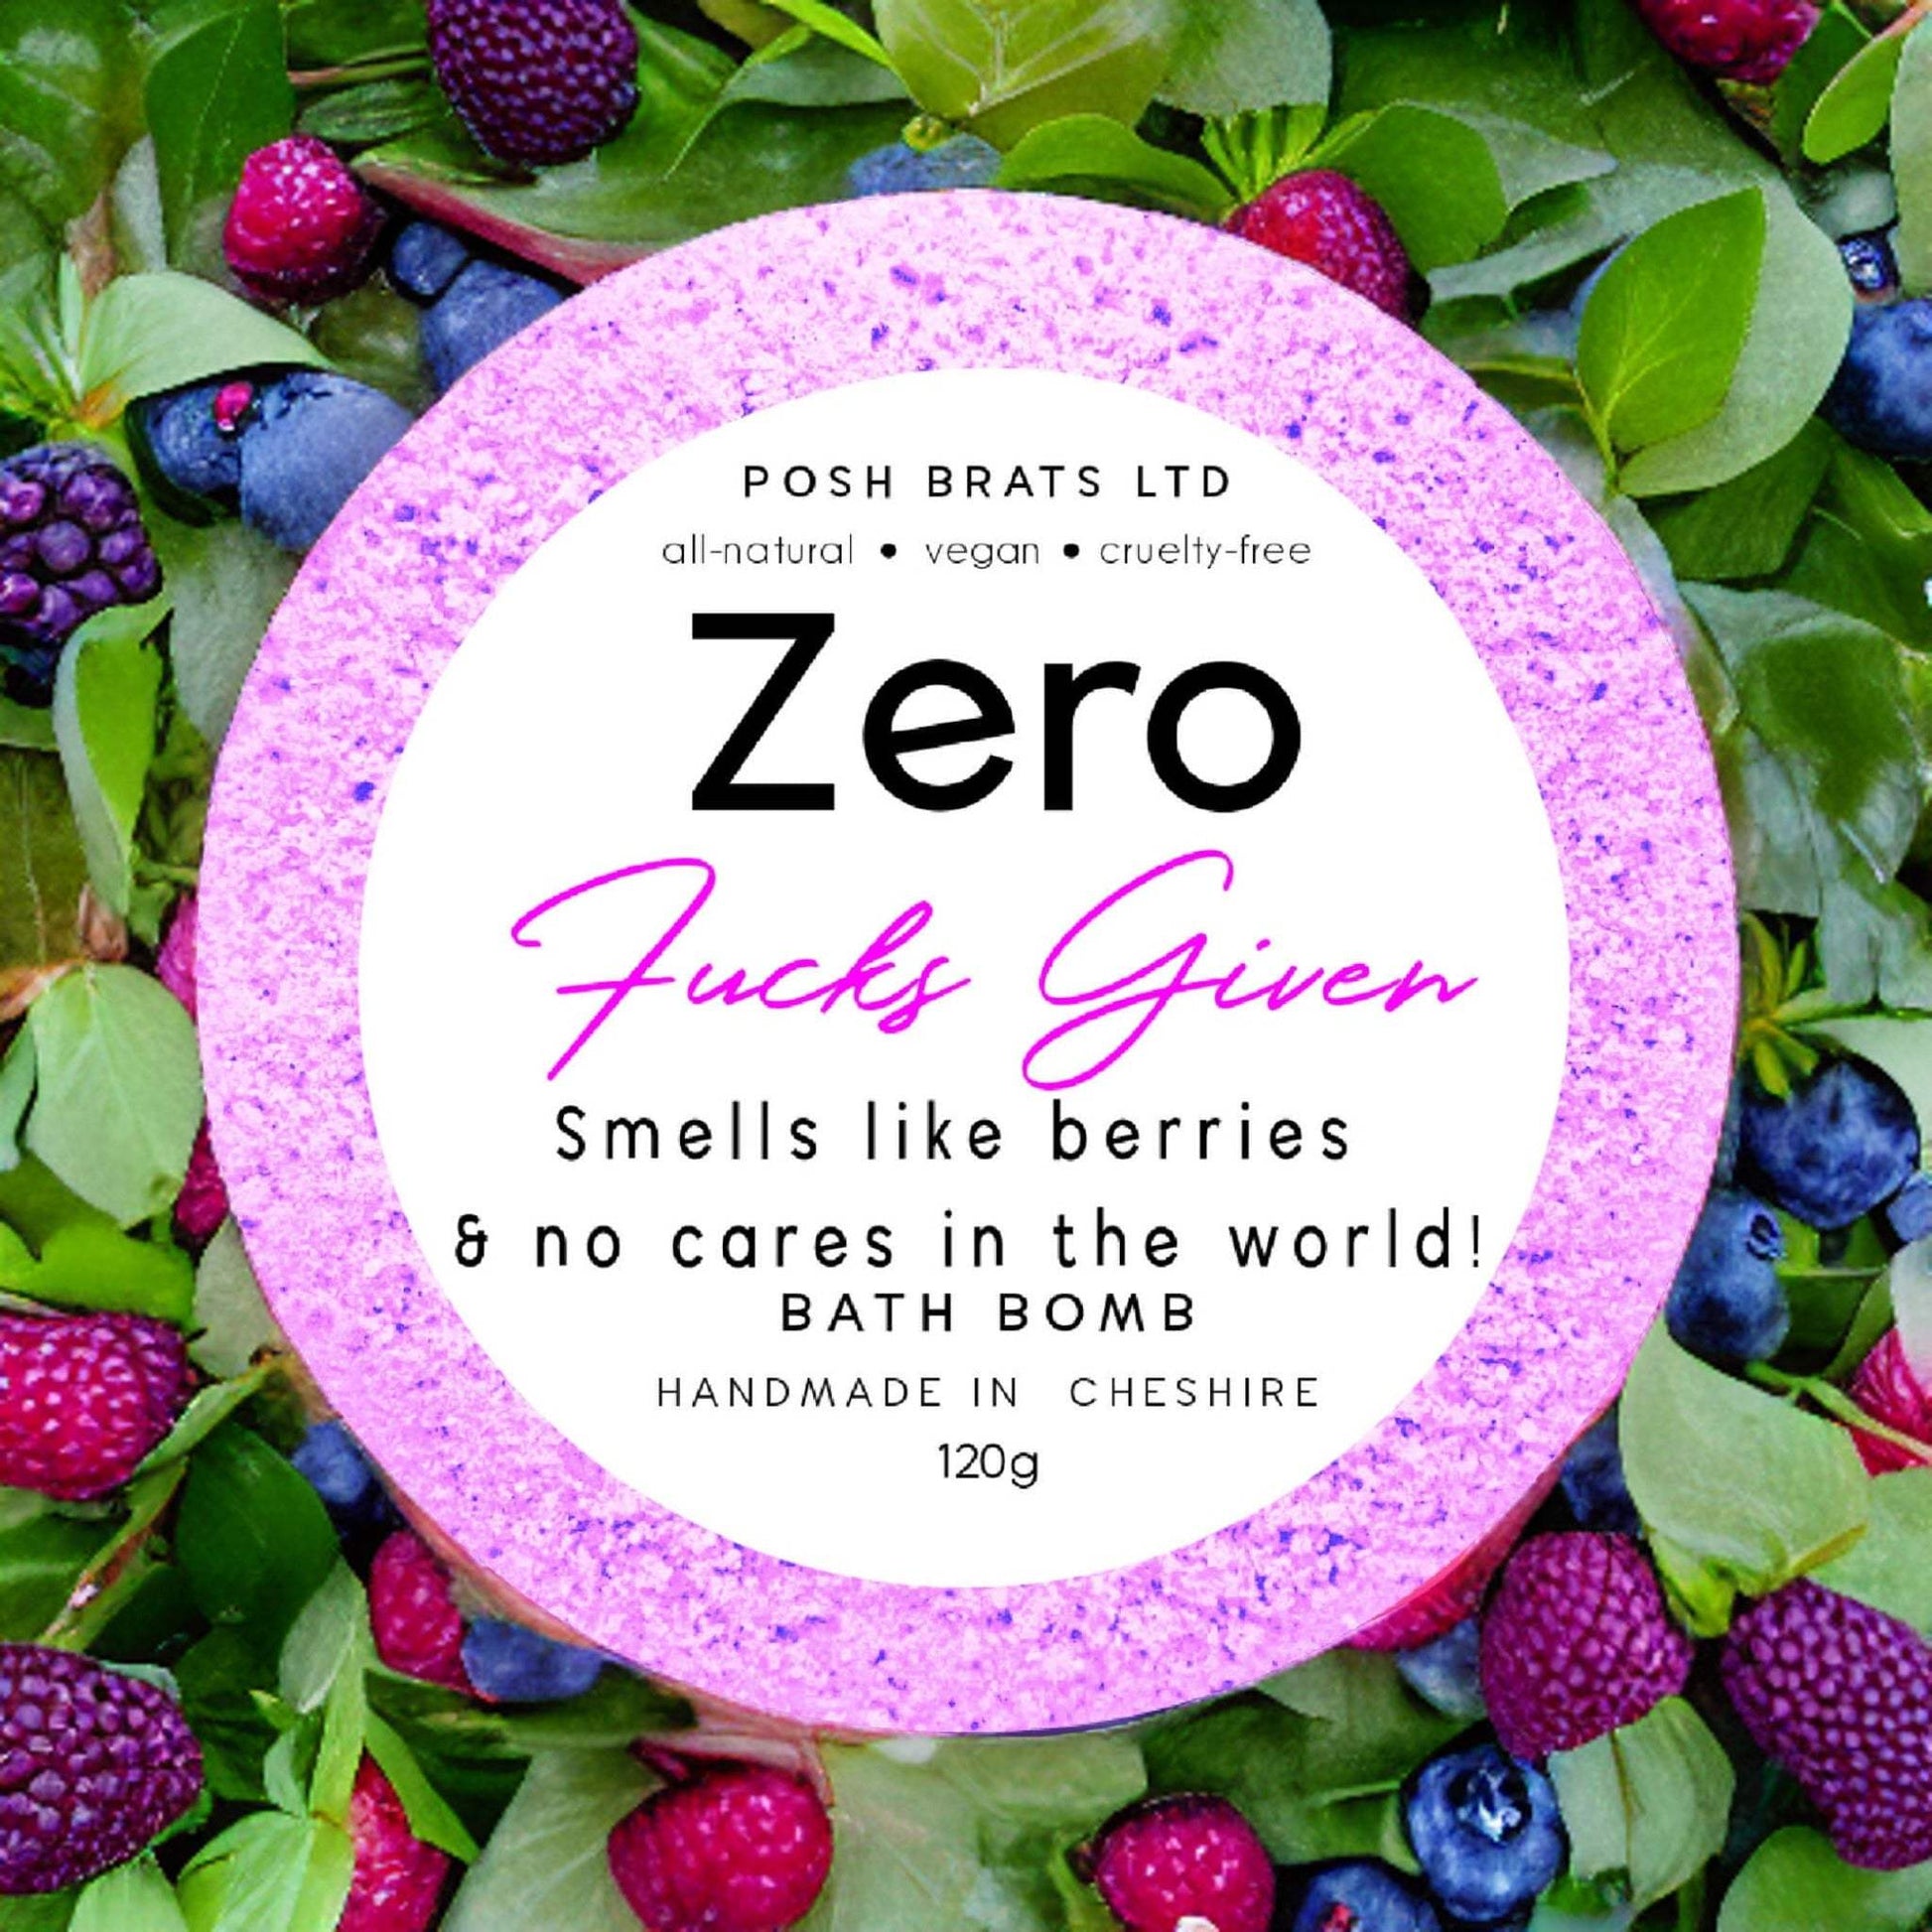 Unwind with our Zero fucks given bath bomb. Immerse yourself in tranquility and say goodbye to stress.